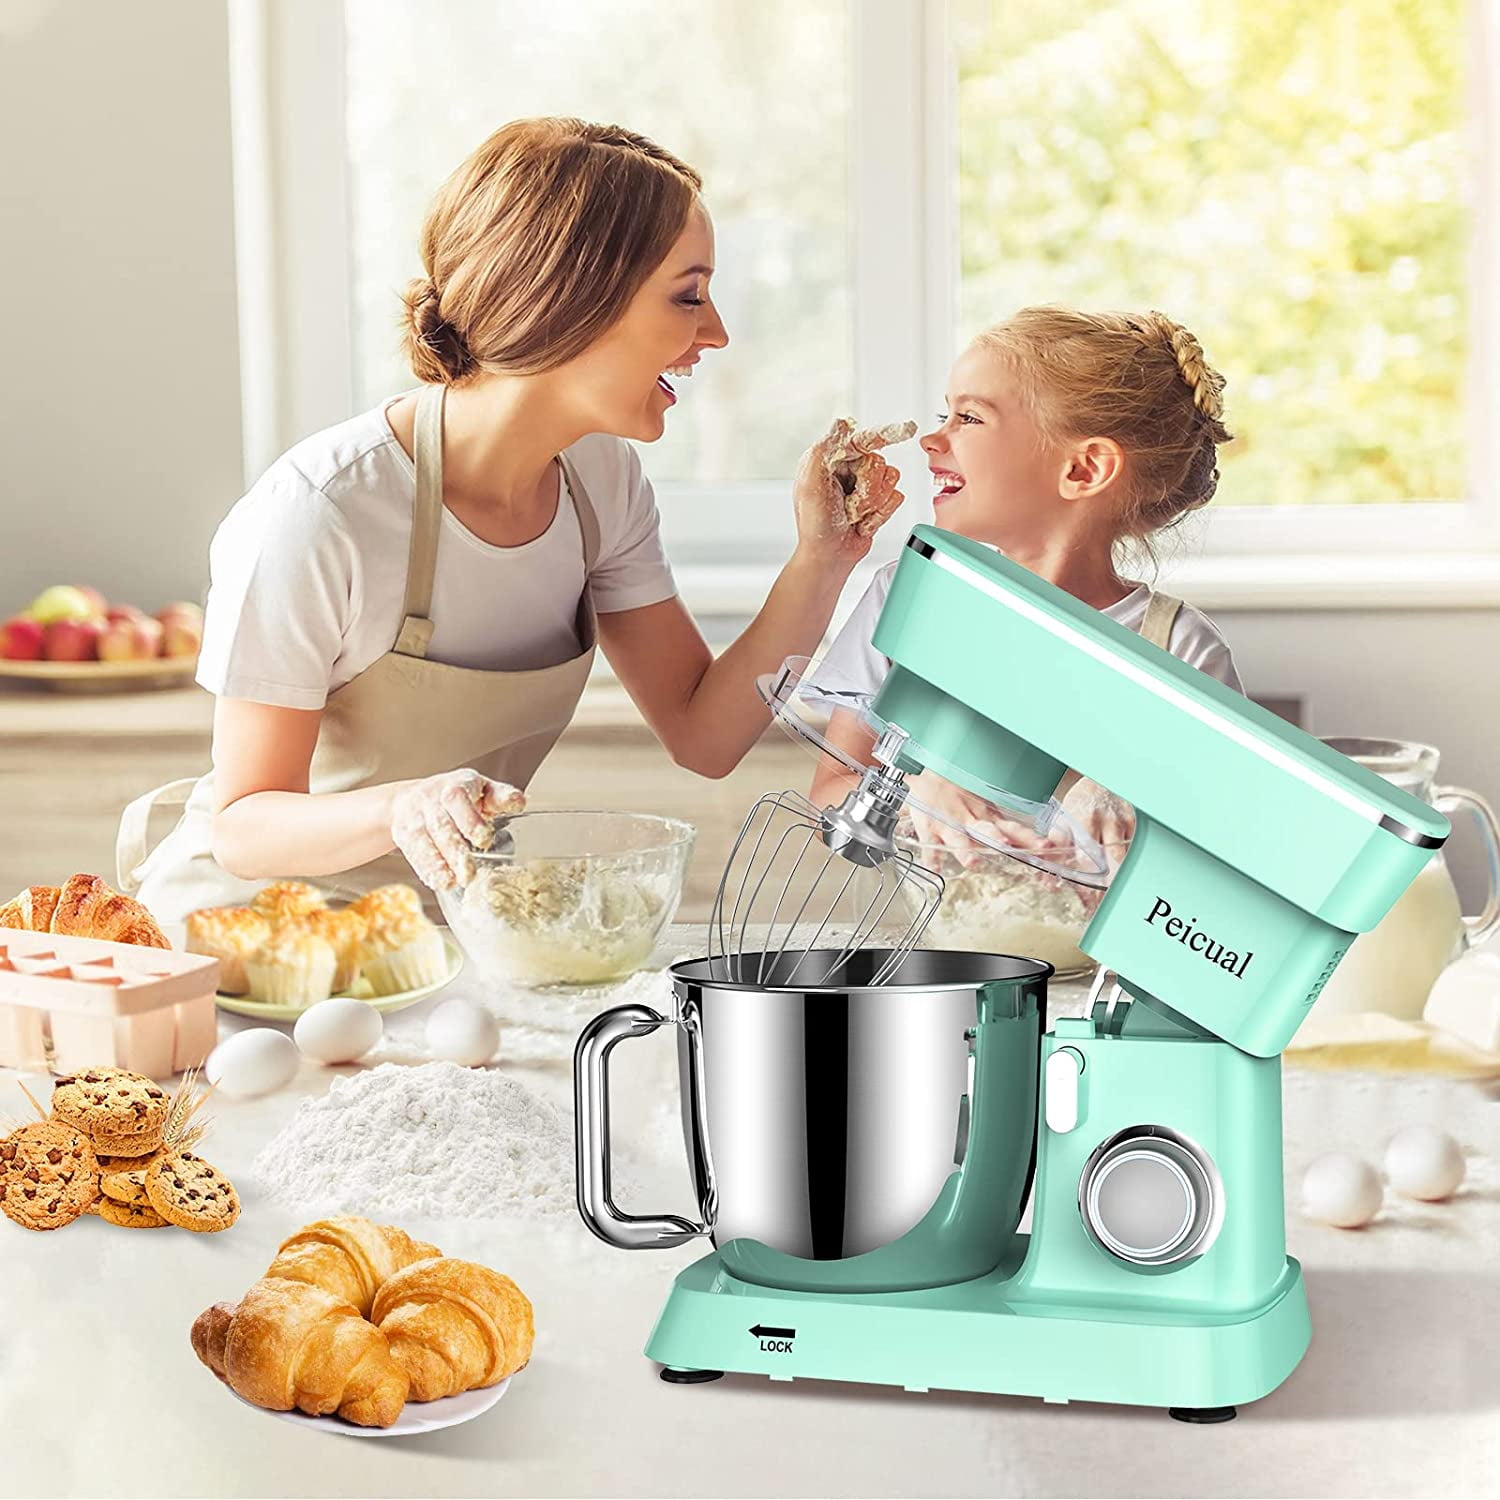 wmt103 new rechargeable kitchen small mixer